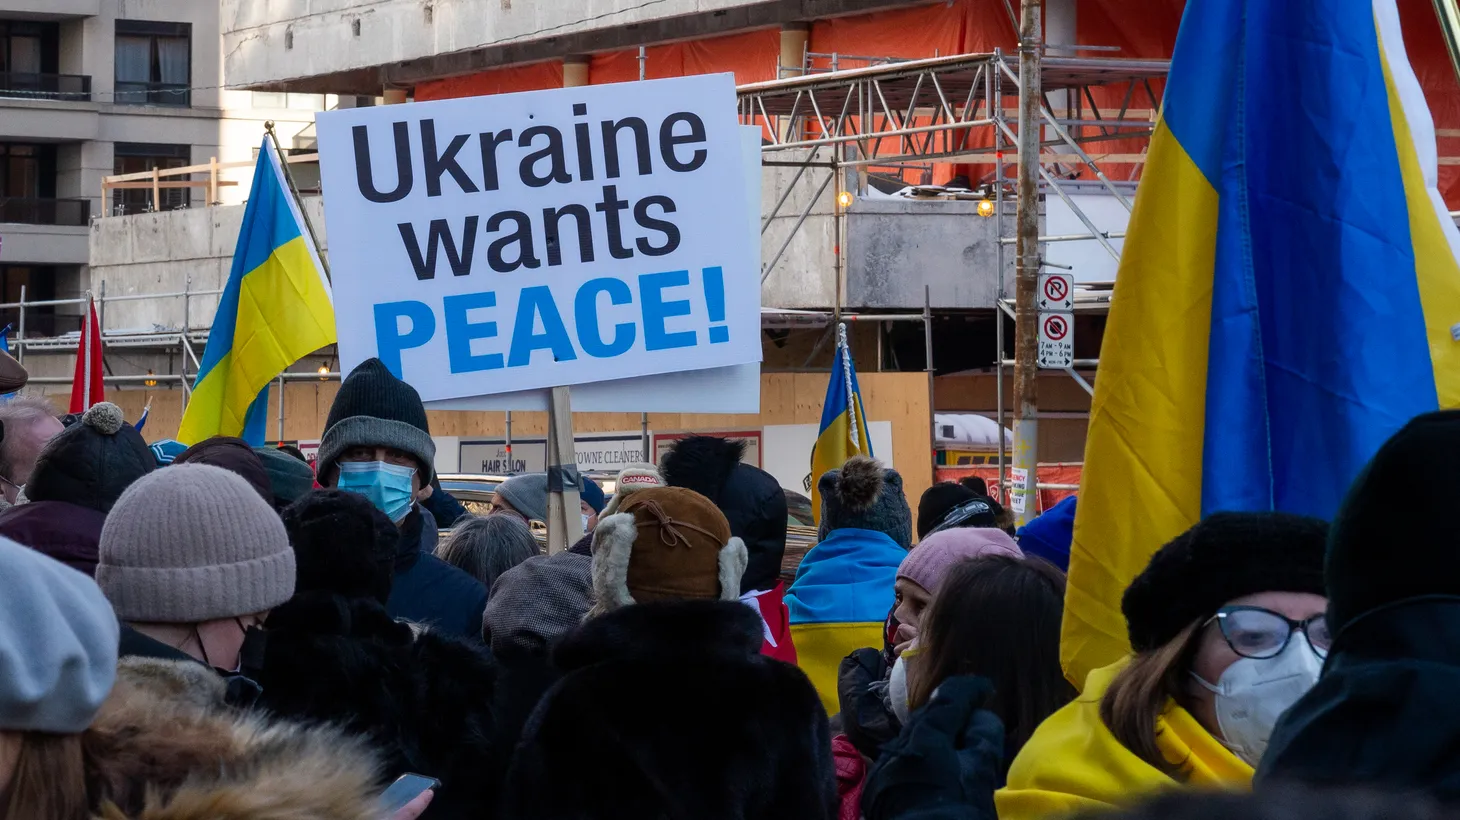 Protestors with placards and Ukrainian flags outside the Russian Consulate demonstrate against the Russian aggression in Ukraine and Russia's intervention in Crimea.